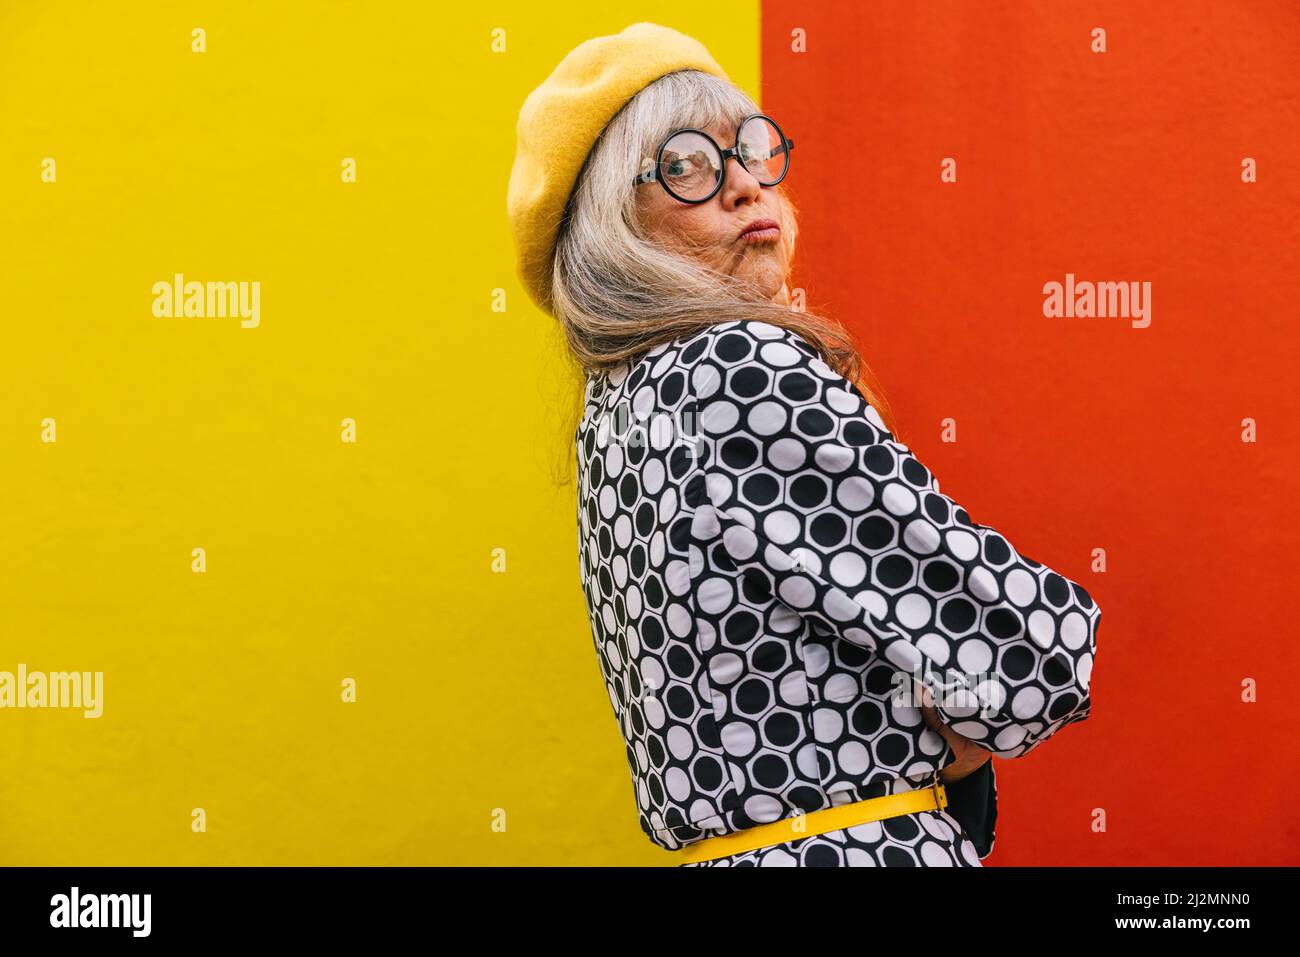 Funny senior woman looking at the camera with her lips pouted. Elderly woman standing against a red and yellow background with her arms crossed. Matur Stock Photo